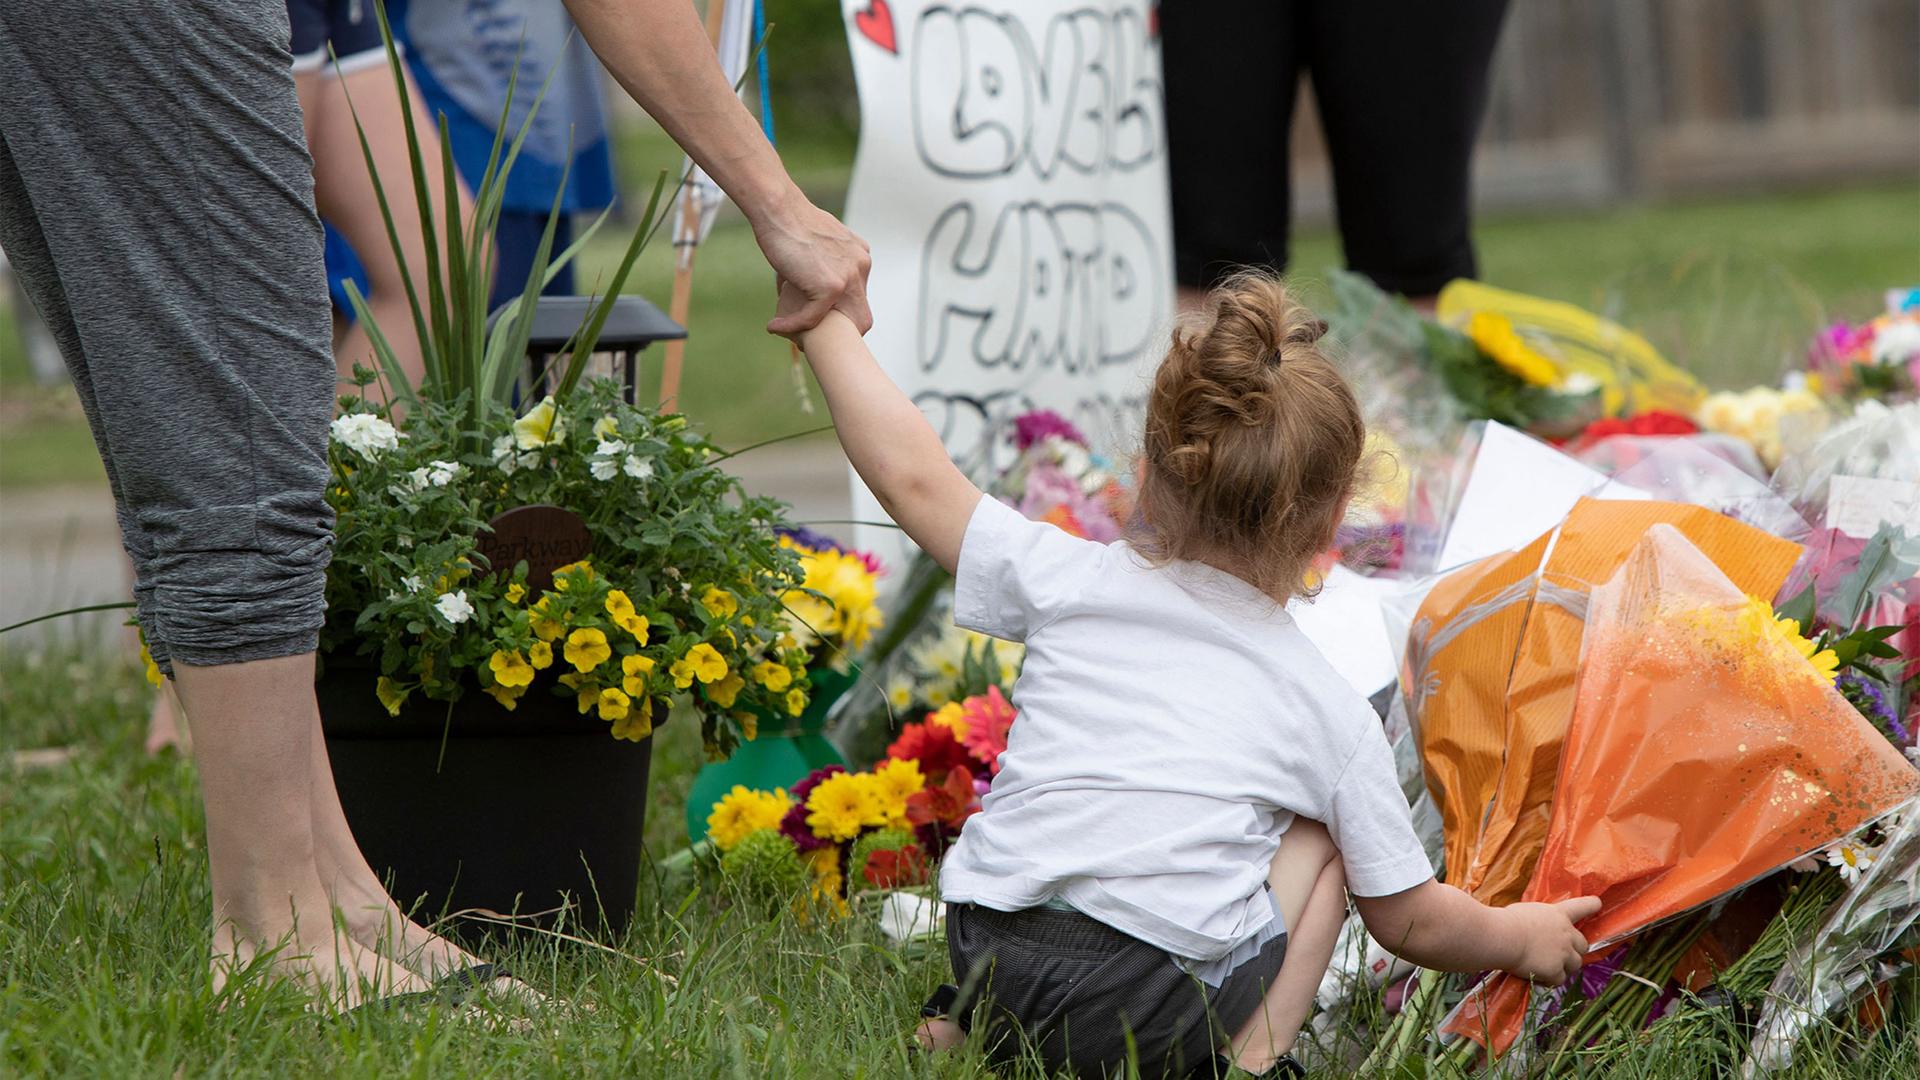 A woman holds on to a child's hand and she places flowers at a memorial